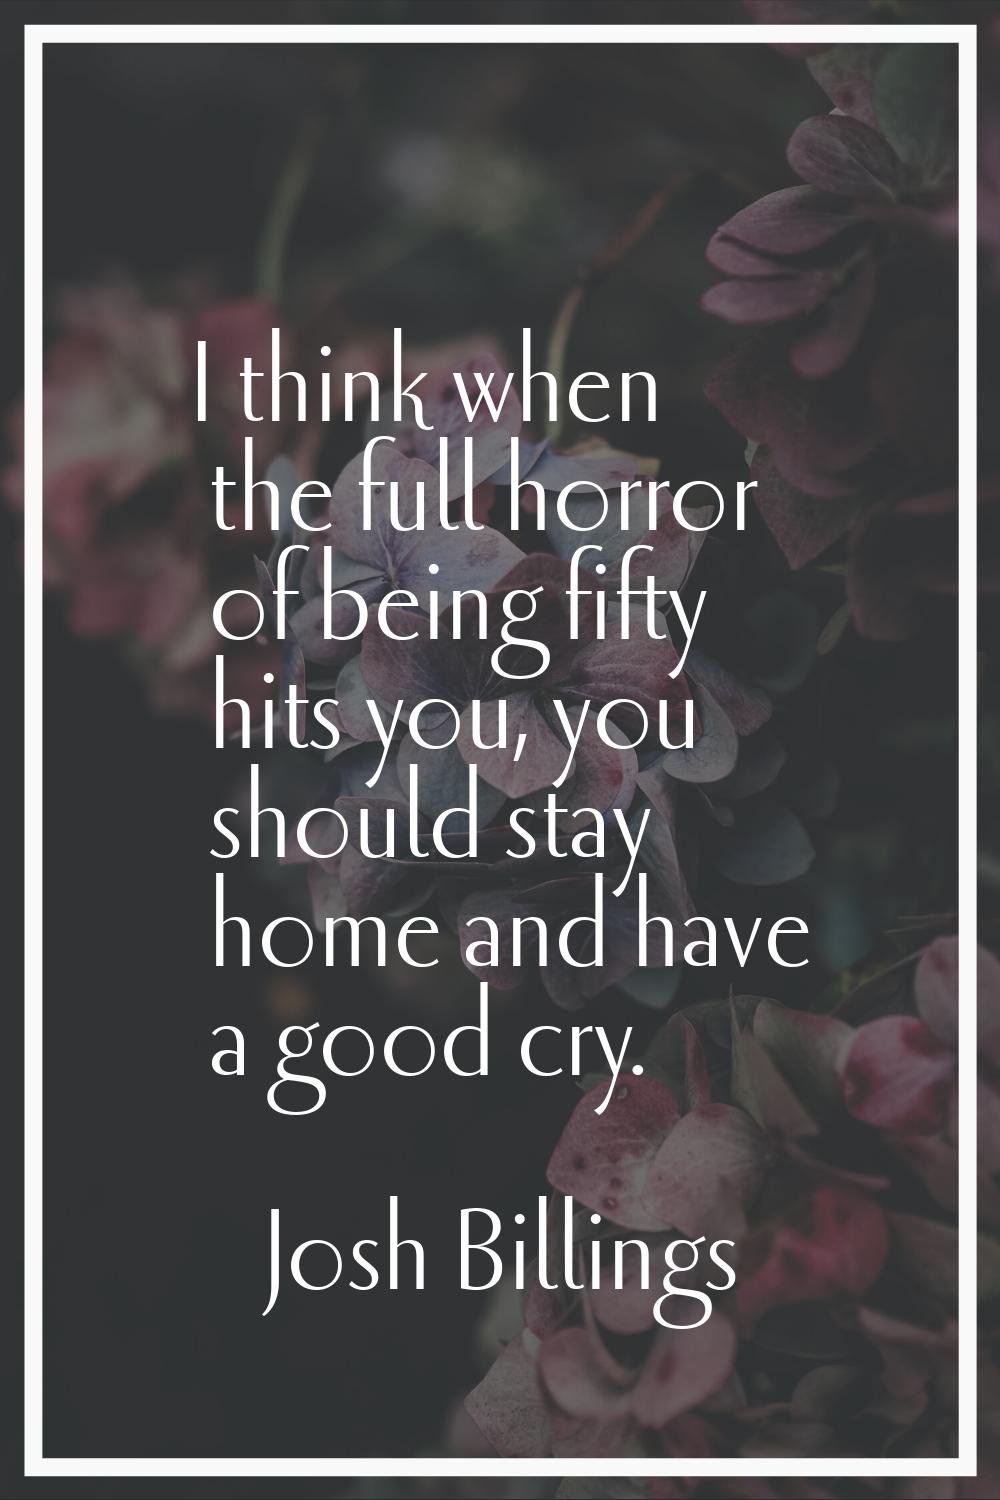 I think when the full horror of being fifty hits you, you should stay home and have a good cry.